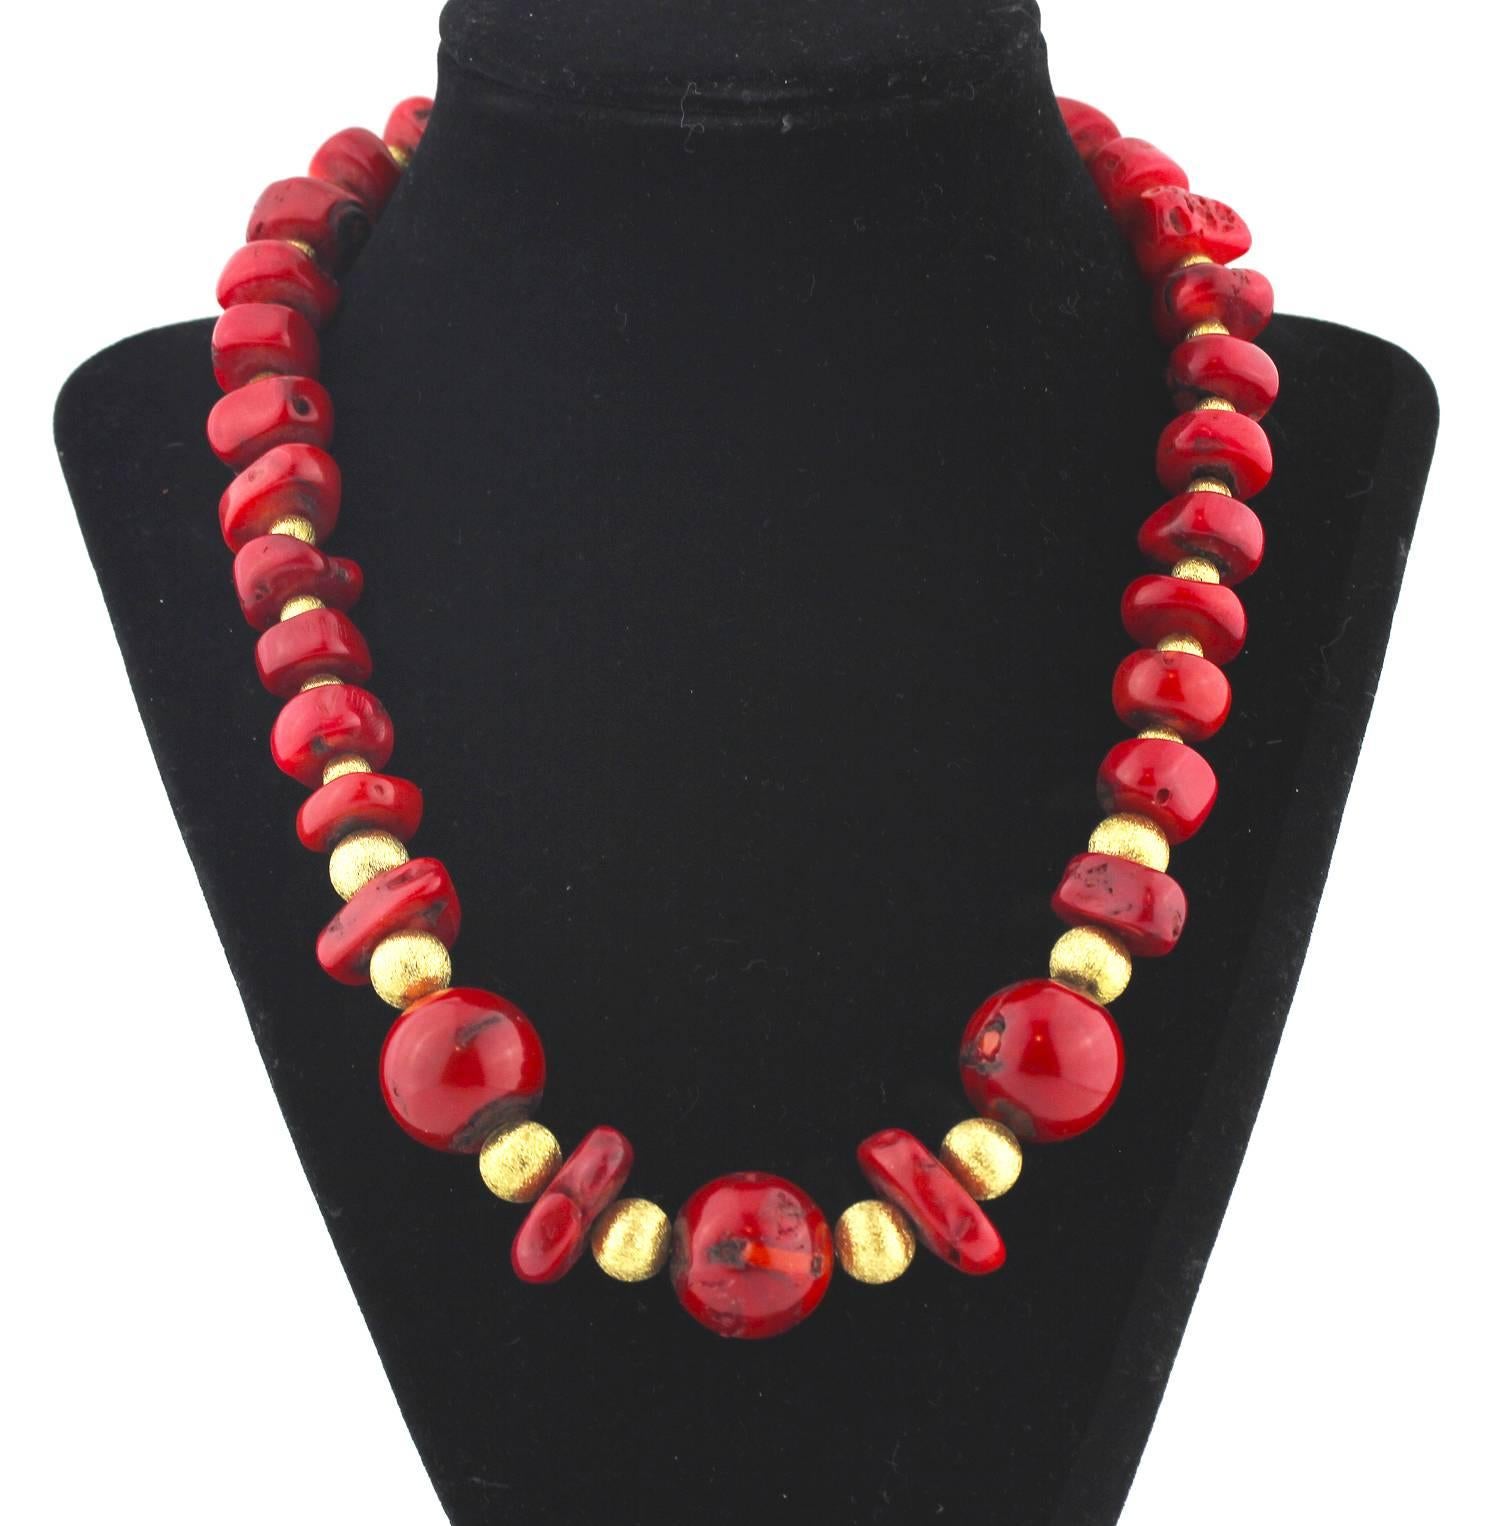 Raw polished Chinese Dyed Bamboo Coral with gold tone enhancements necklace
Size:  large round Coral approximately 20 mm
Length:  19 inches
Clasp:  gold tone

